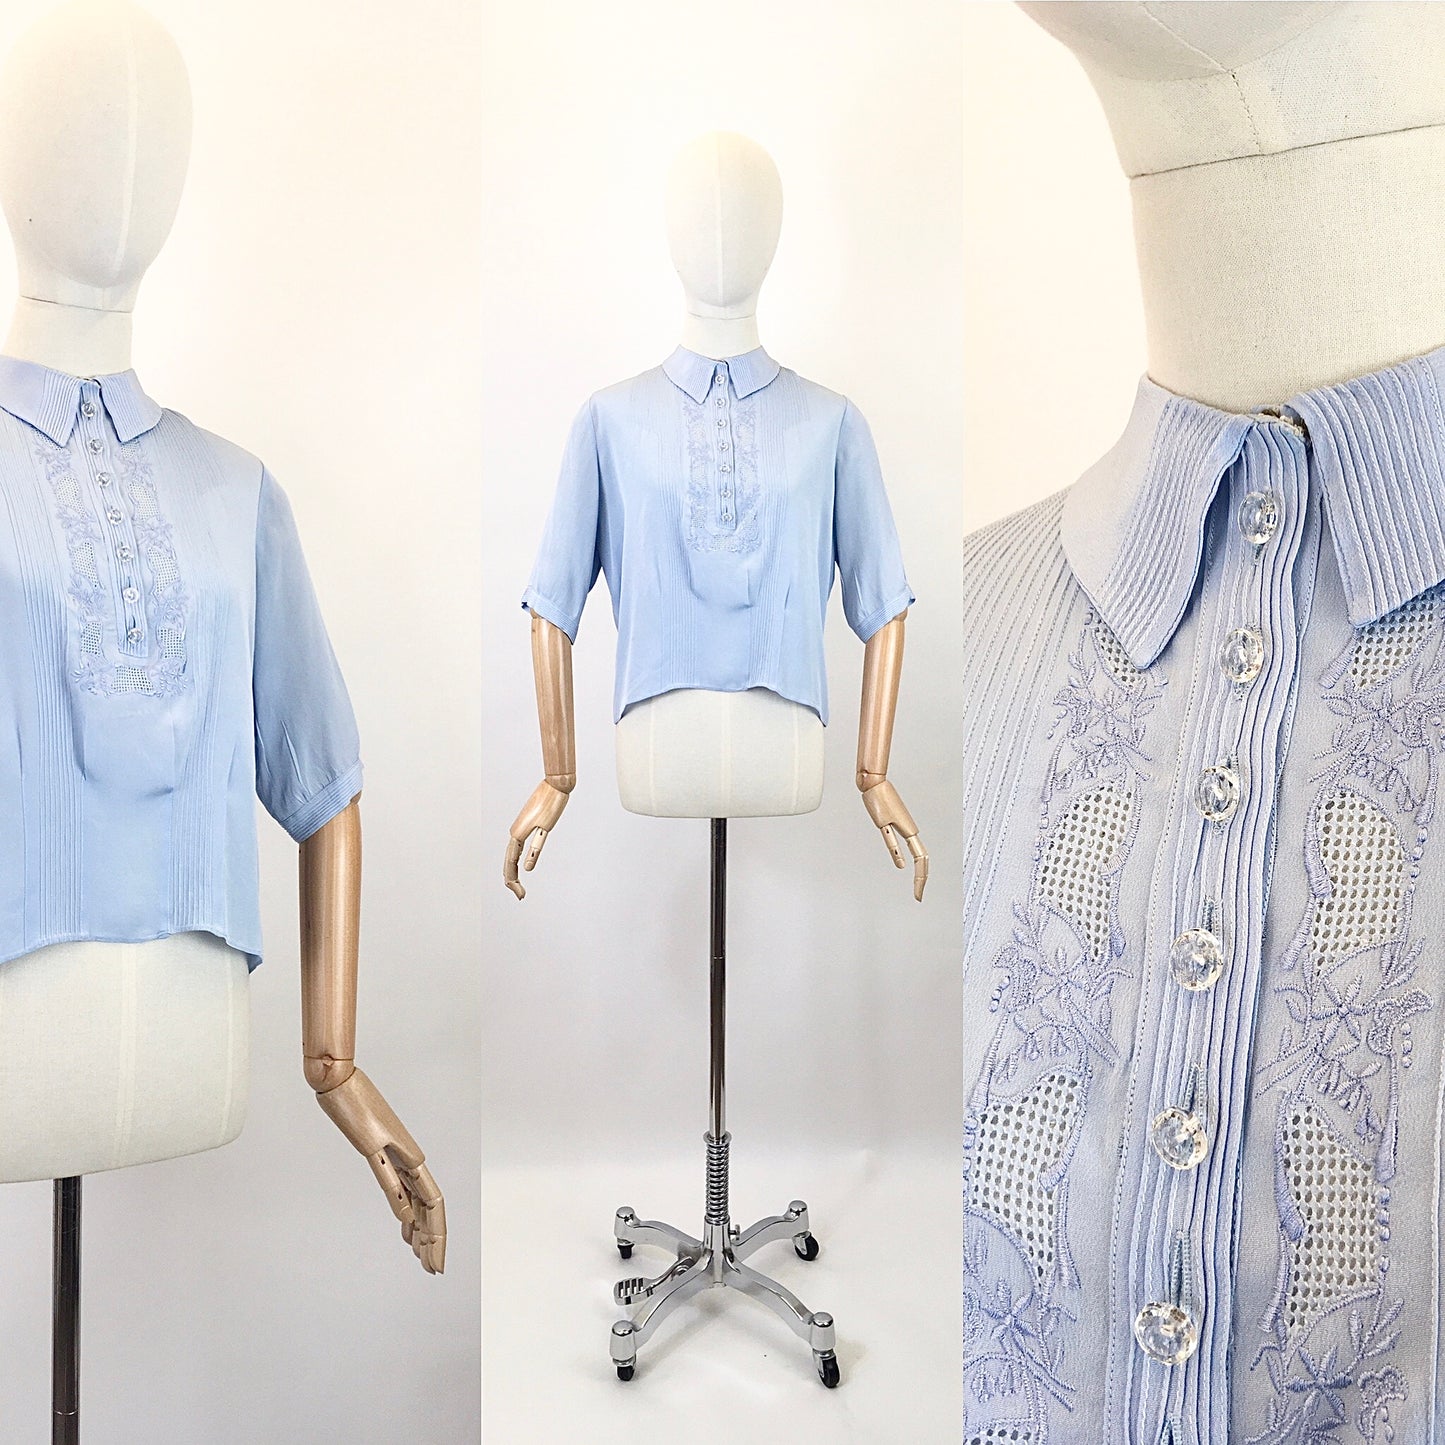 Original 1940’s Darling Sheer Blouse in Powder Blue - With Embroidery and Pintuck Details